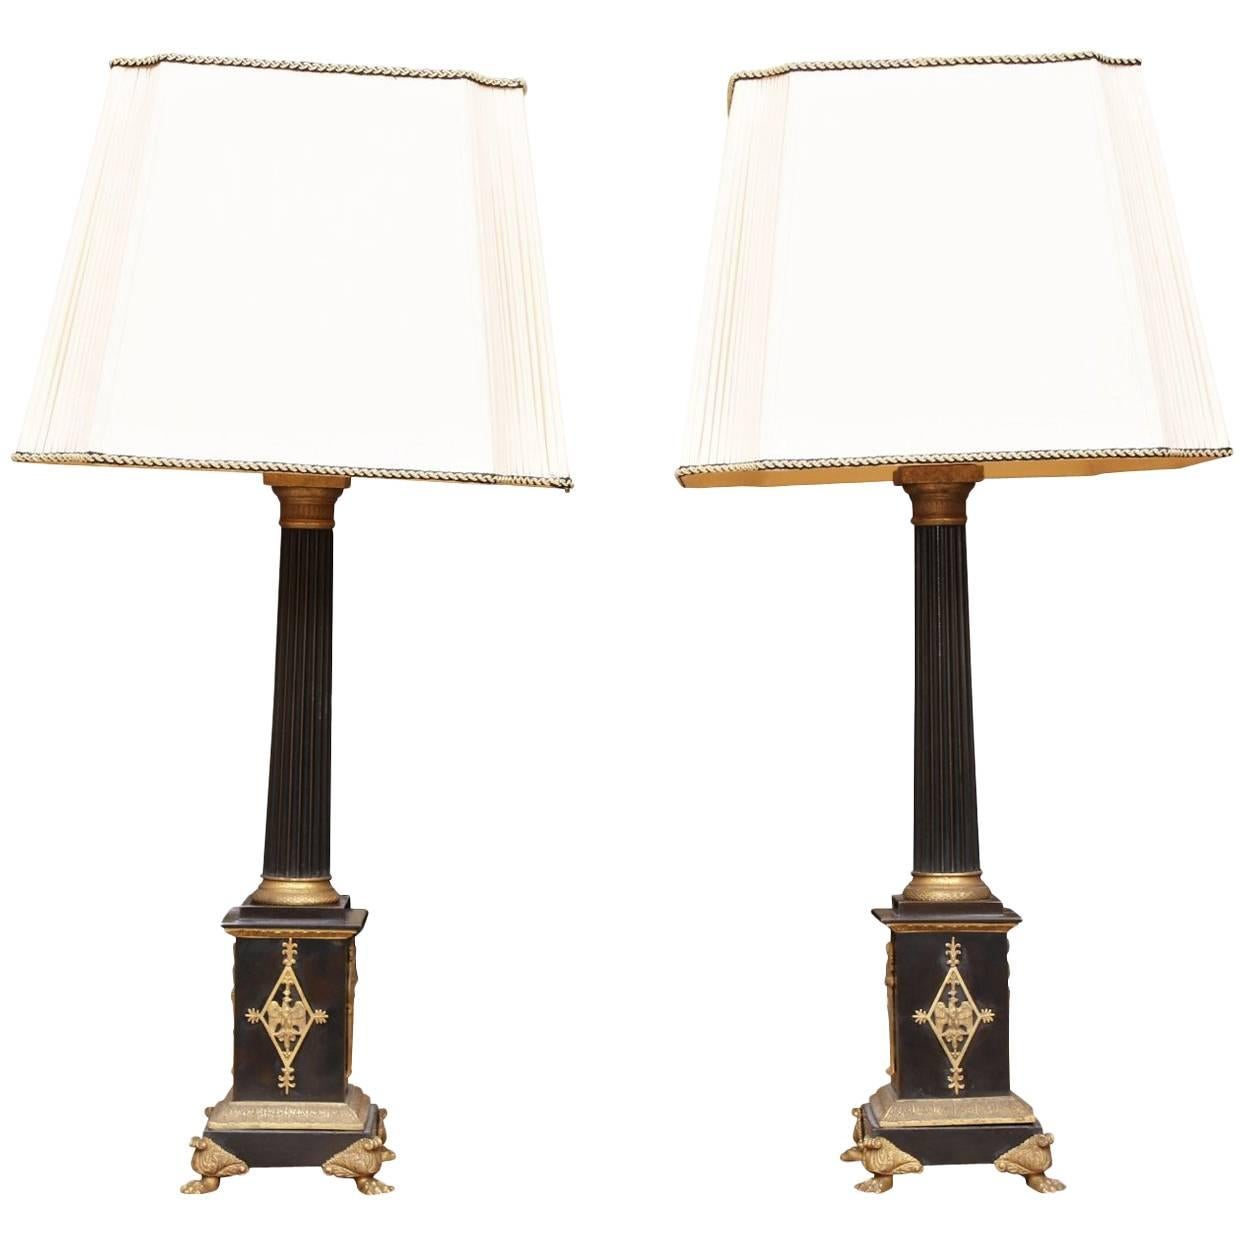 Pair Of French Ebonized And Bronze Mounted Classical Column Form Lamps